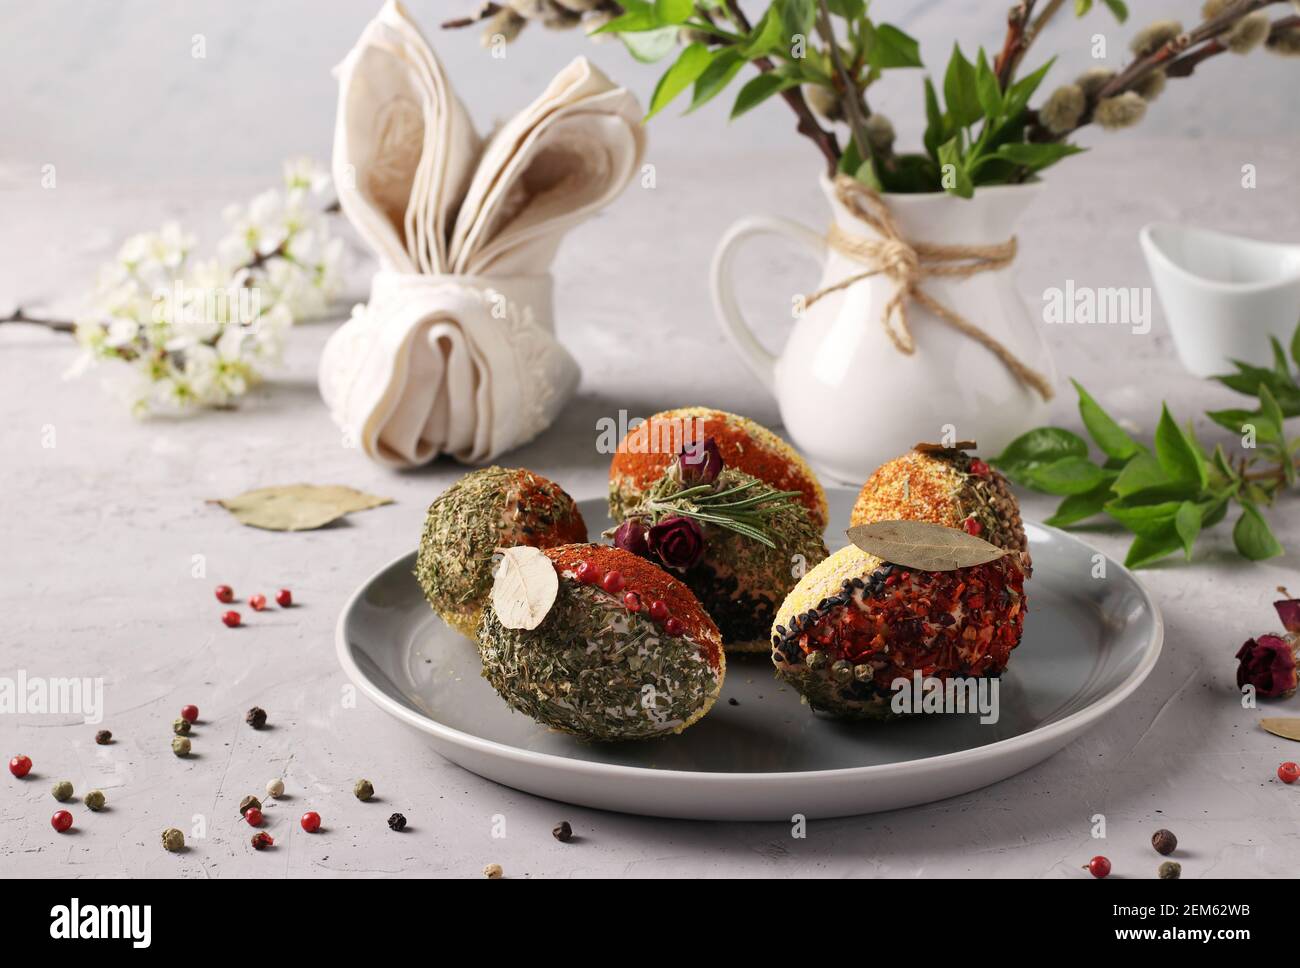 Easter eggs decorated with different spices and cereals without dyes and preservatives on a plate on a gray concrete background. Stock Photo